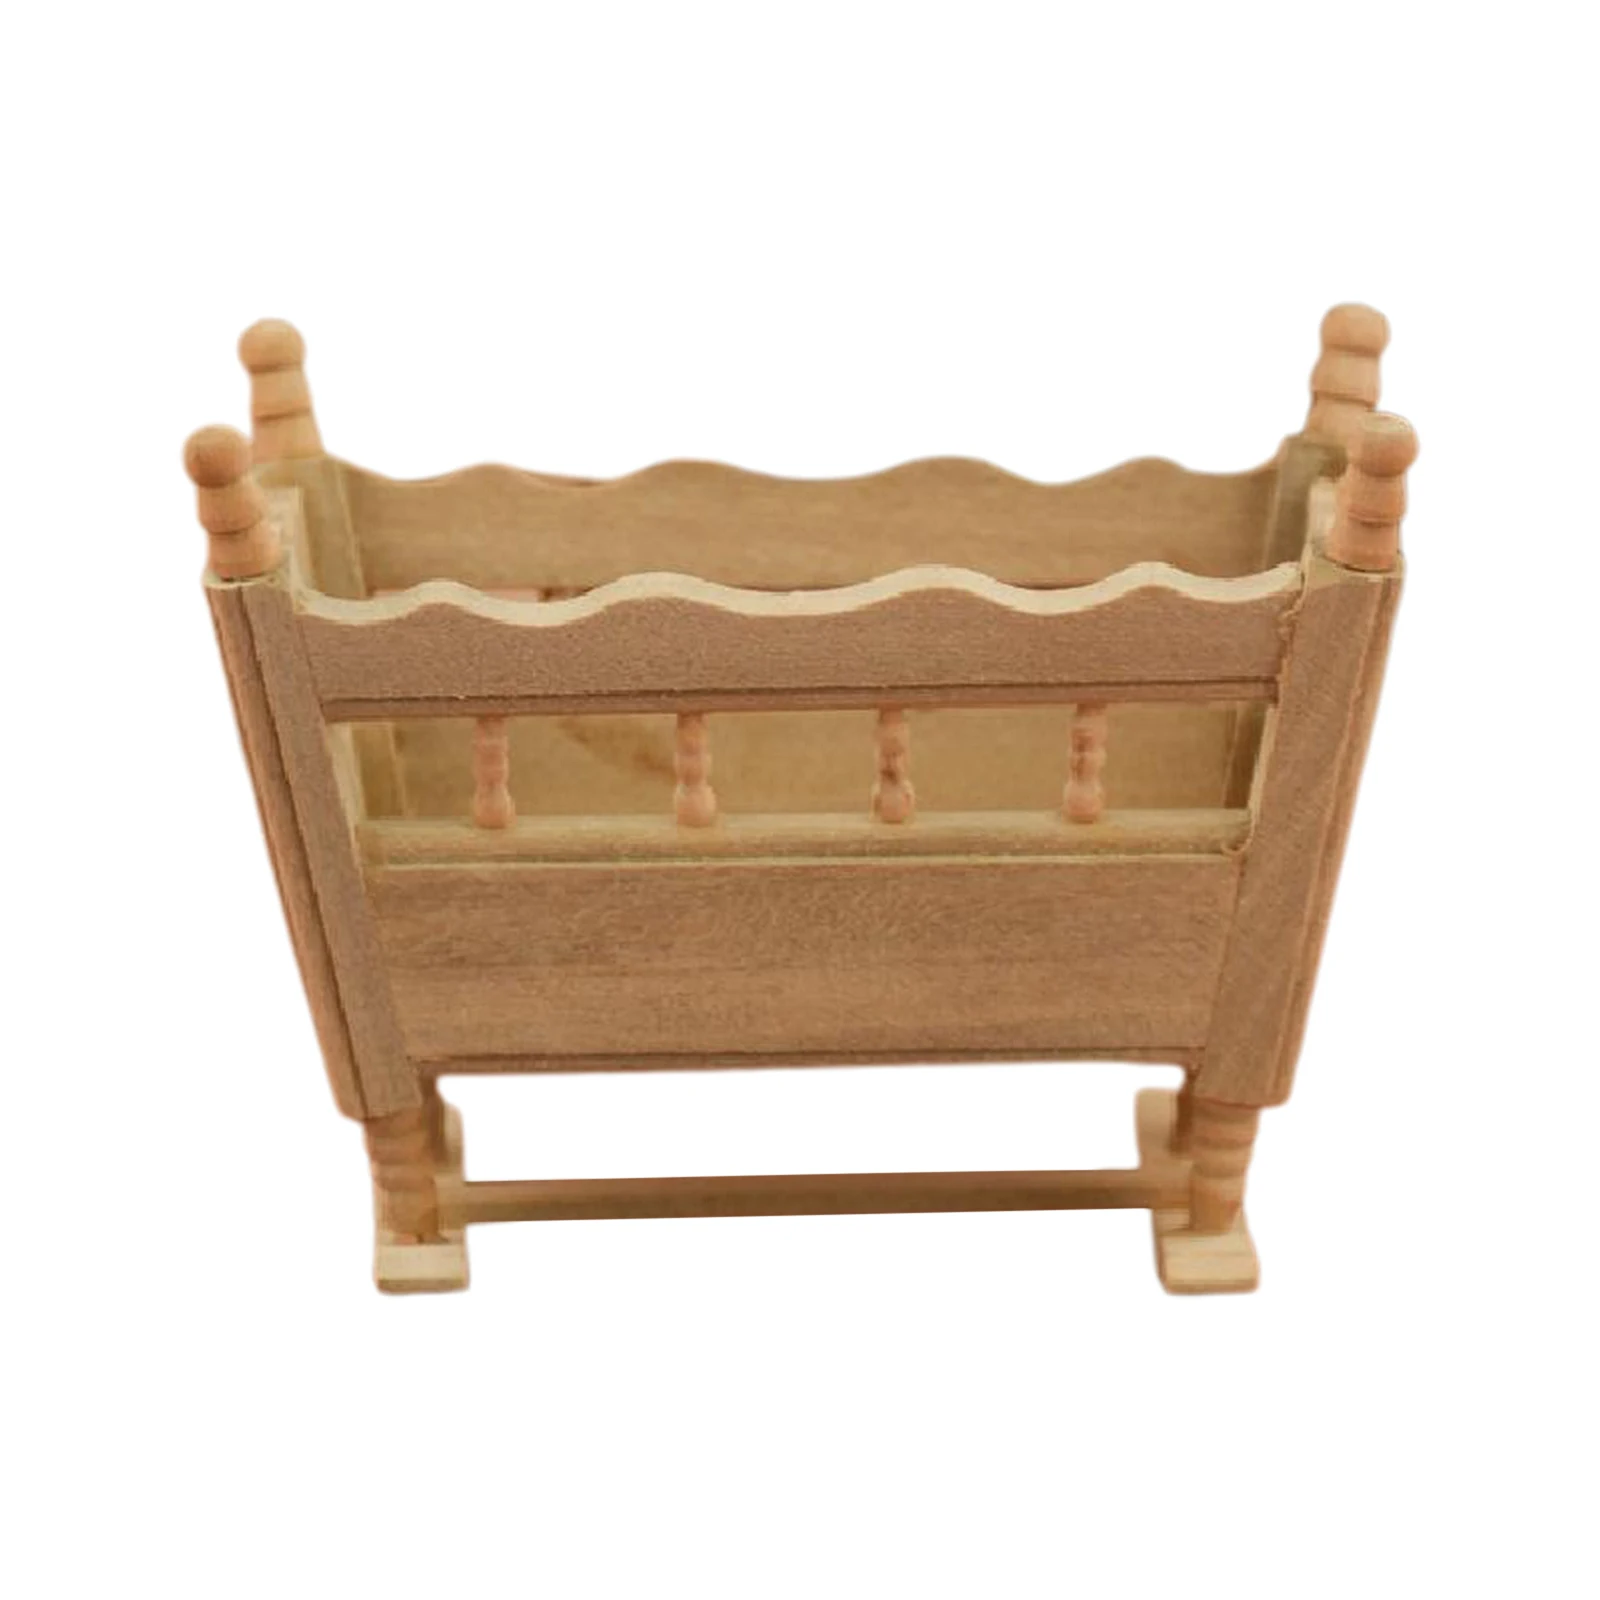 1:12 Scale Doll House Miniature Wooden Cradle Simulation Model Furniture